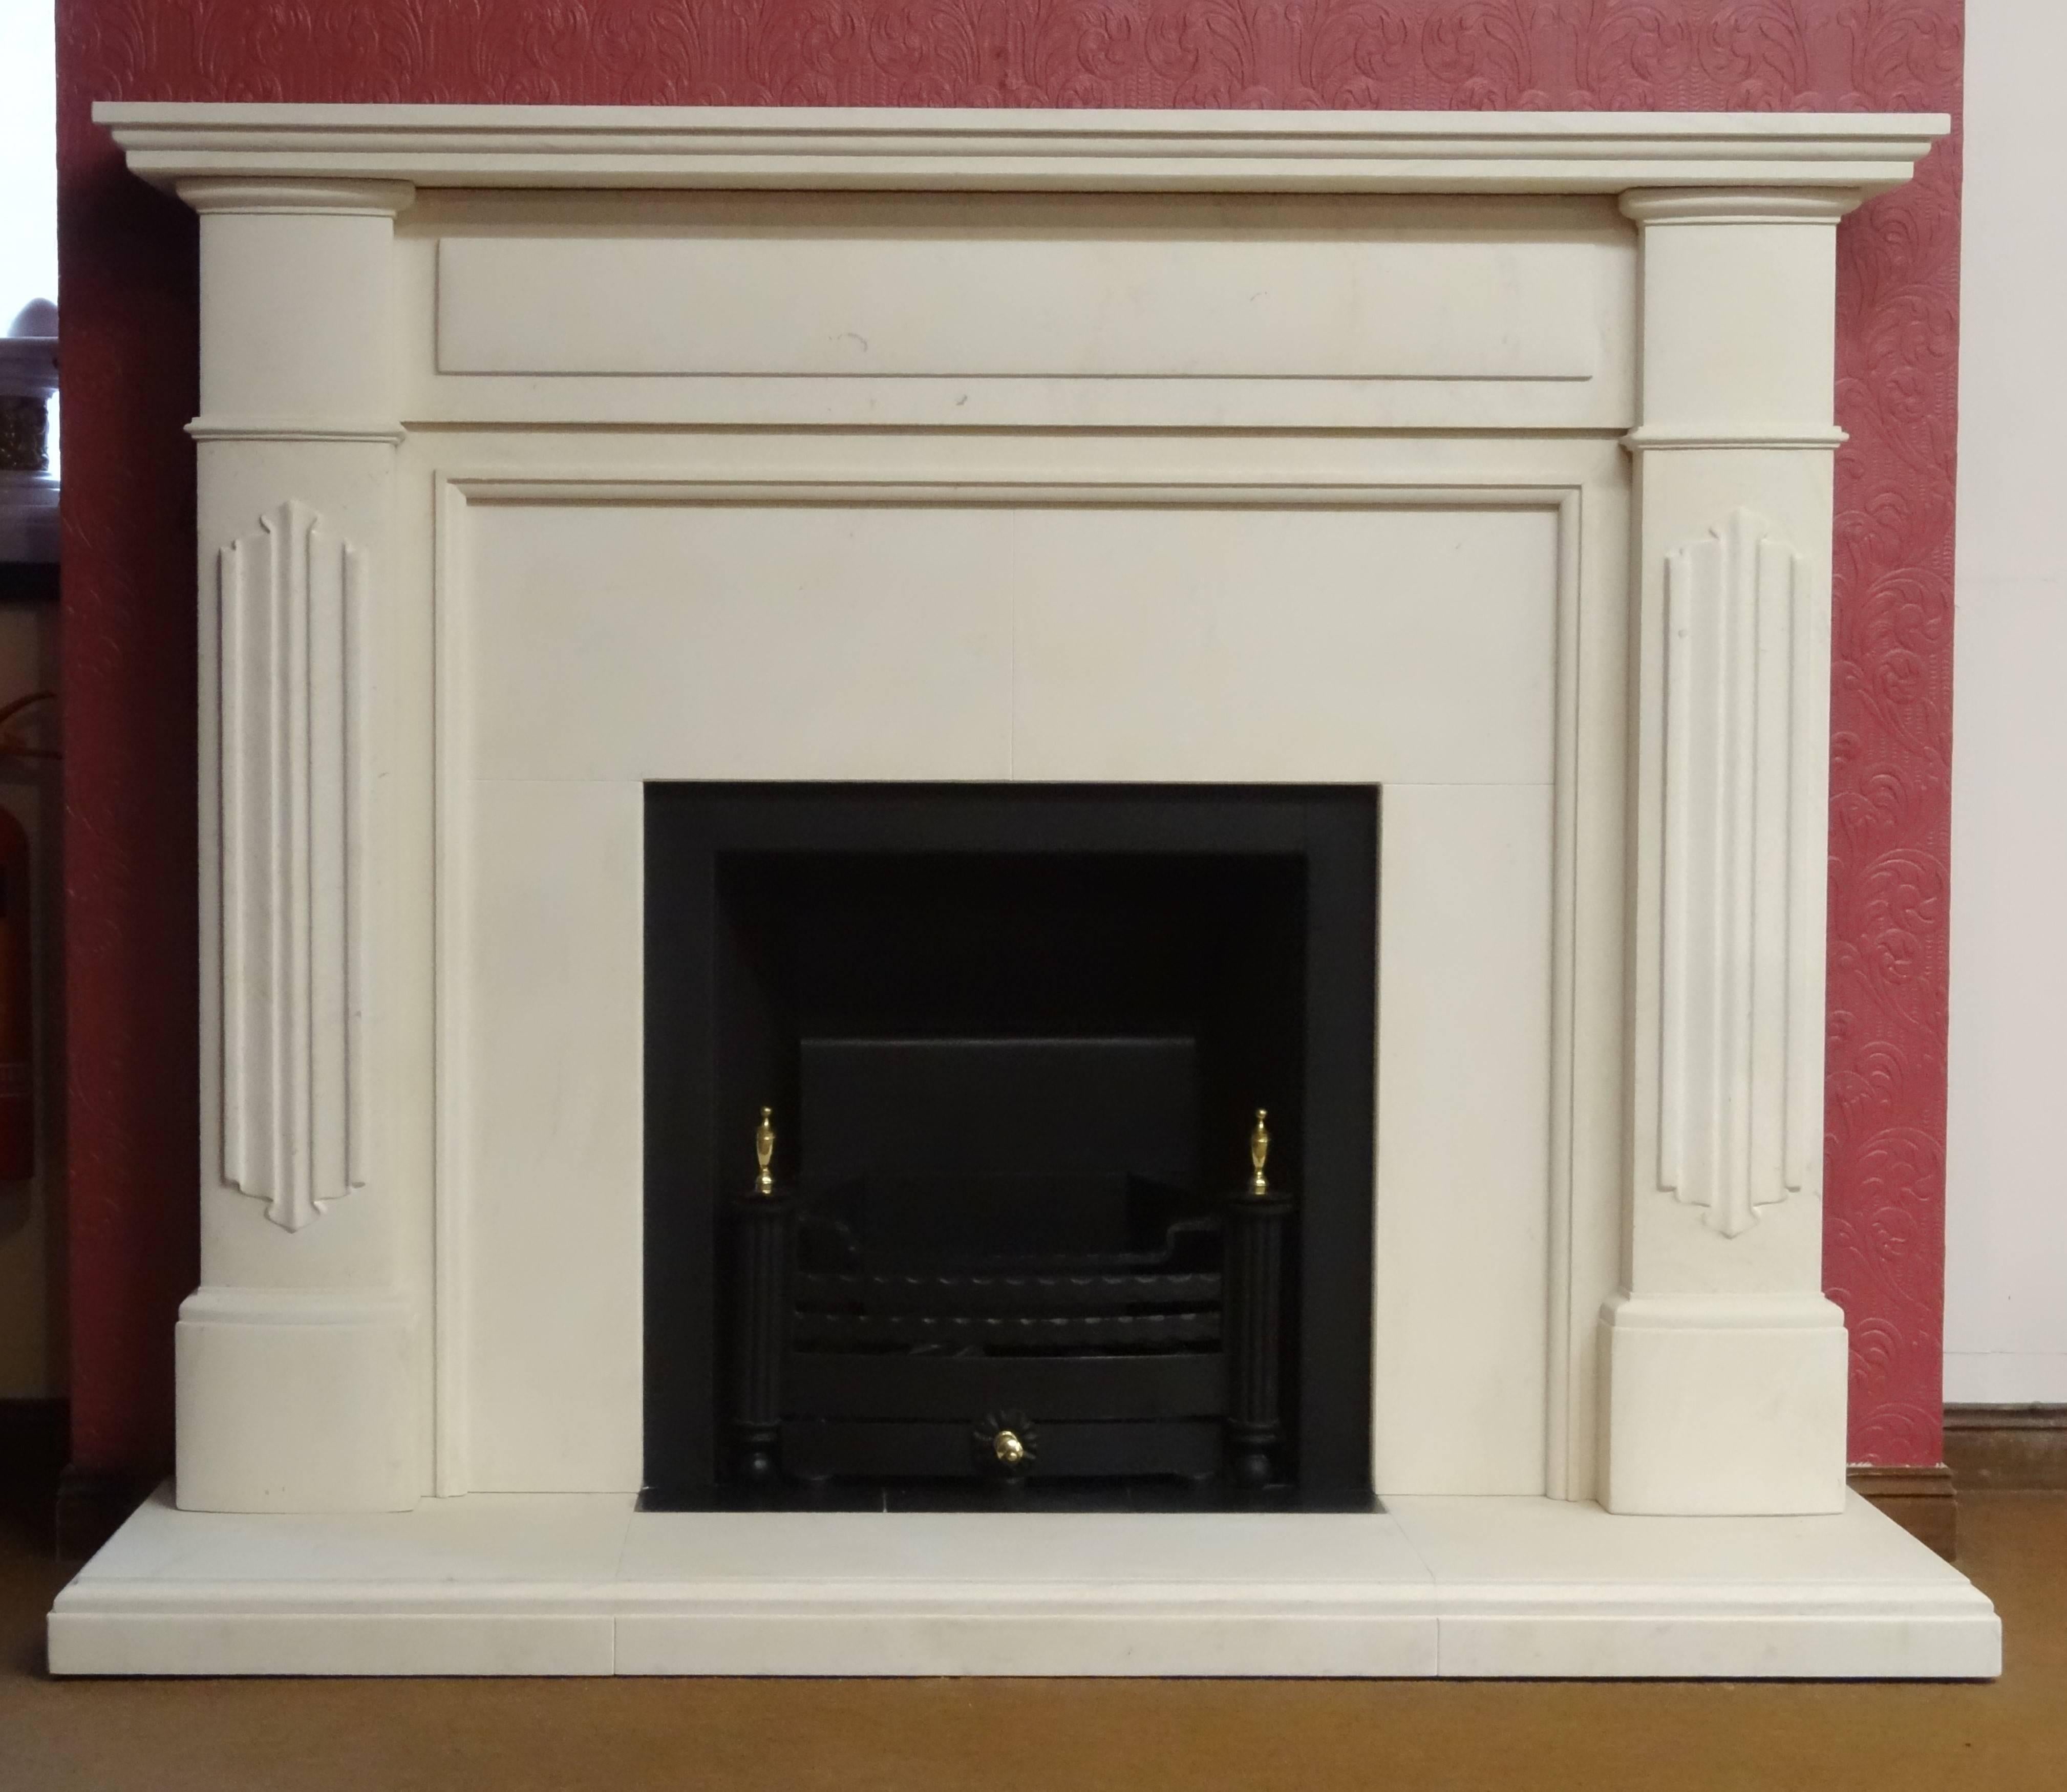 We carved this fireplace from honed Portuguese limestone. The fireplace surround is in the Edwardian style. The fireplace comprises of a matching limestone hearth and insert with a built in metal trim and a removable fire basket. Sample of this